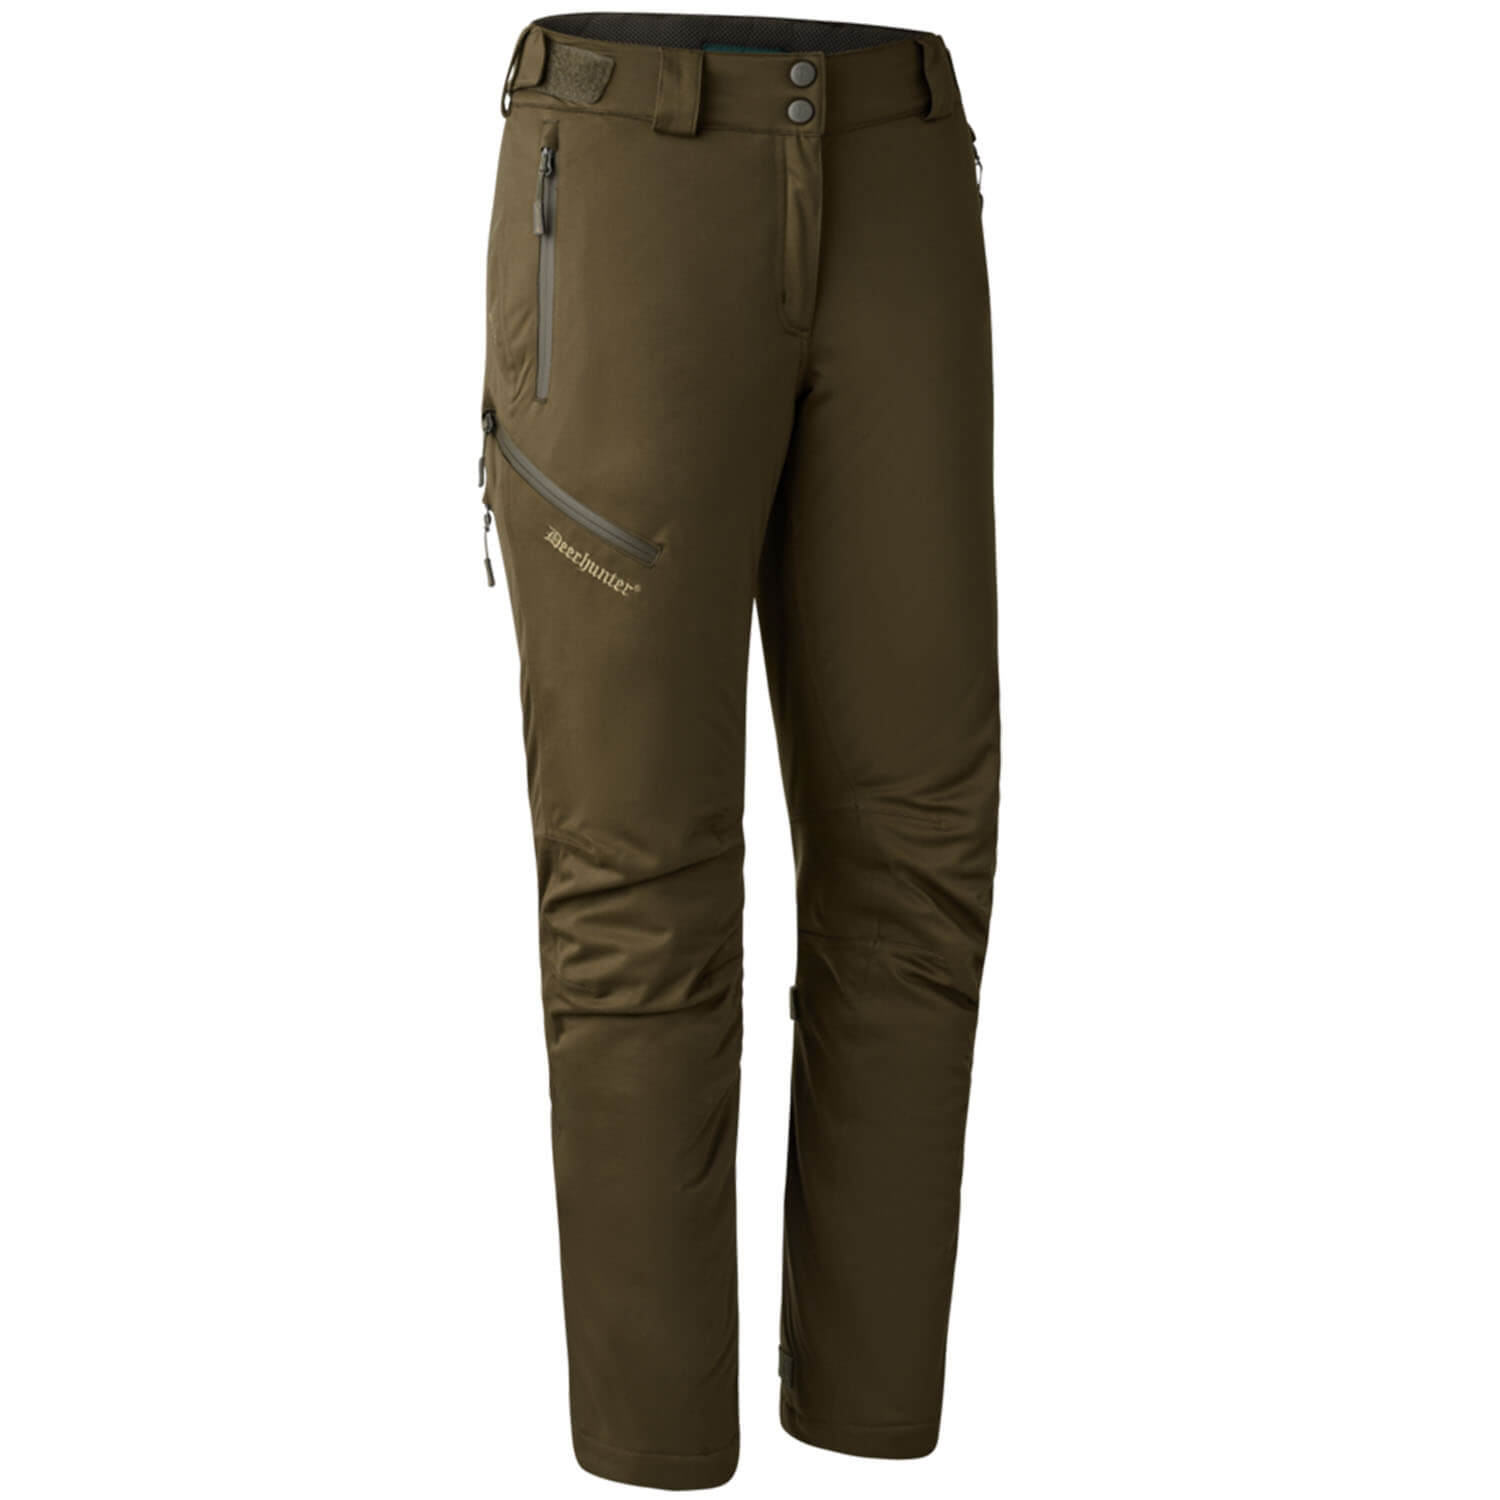 Deerhunter winter Trousers Lady Excape (grün) - Winter Hunting Clothing